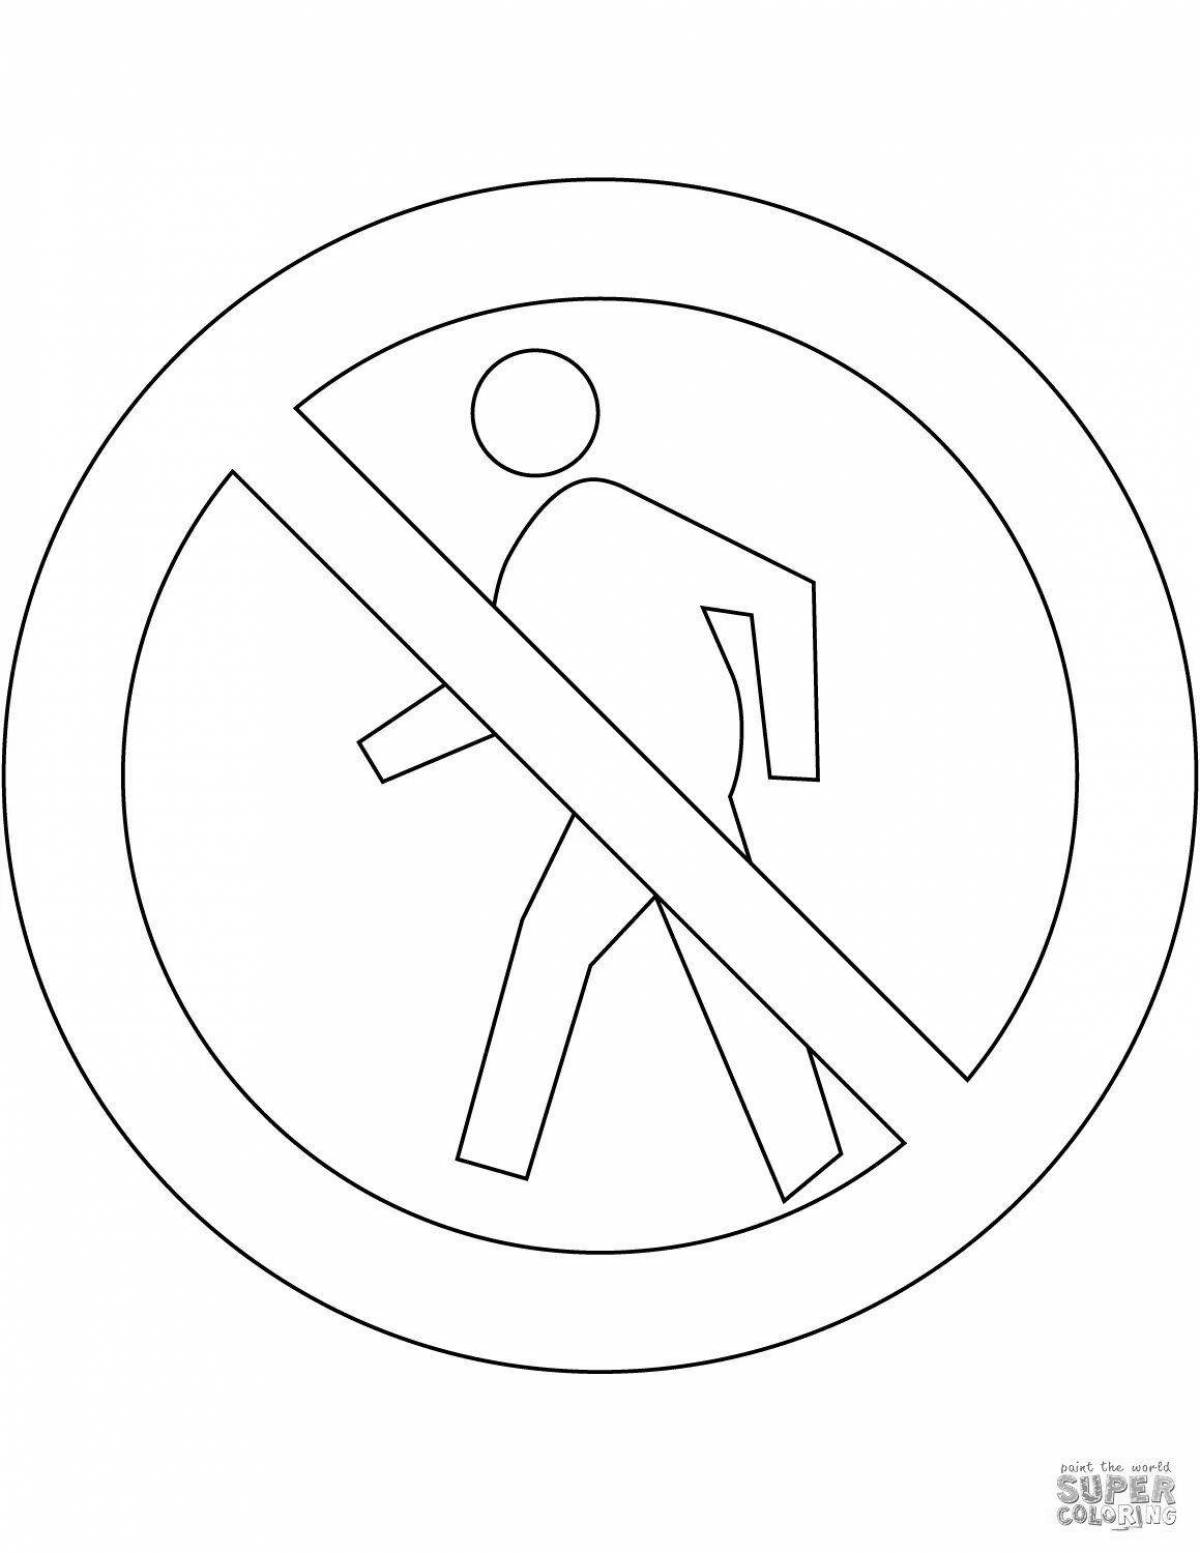 Animated no traffic sign coloring page